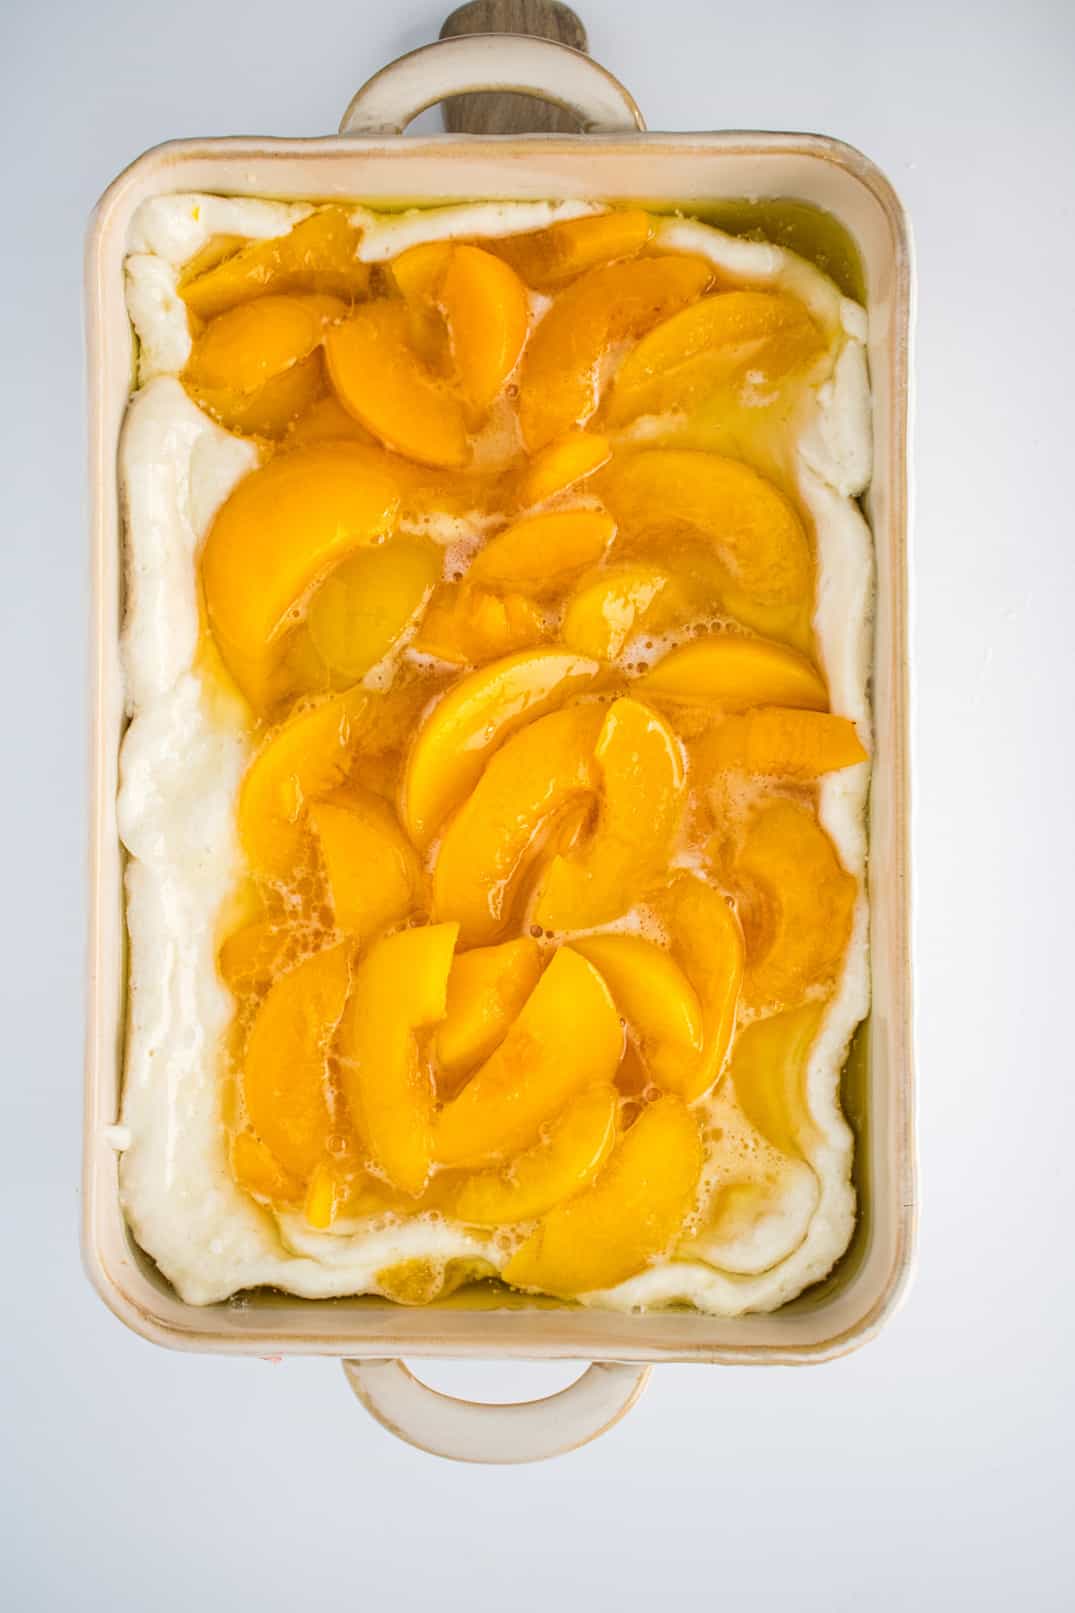 Assembling and layering my southern peach cobbler